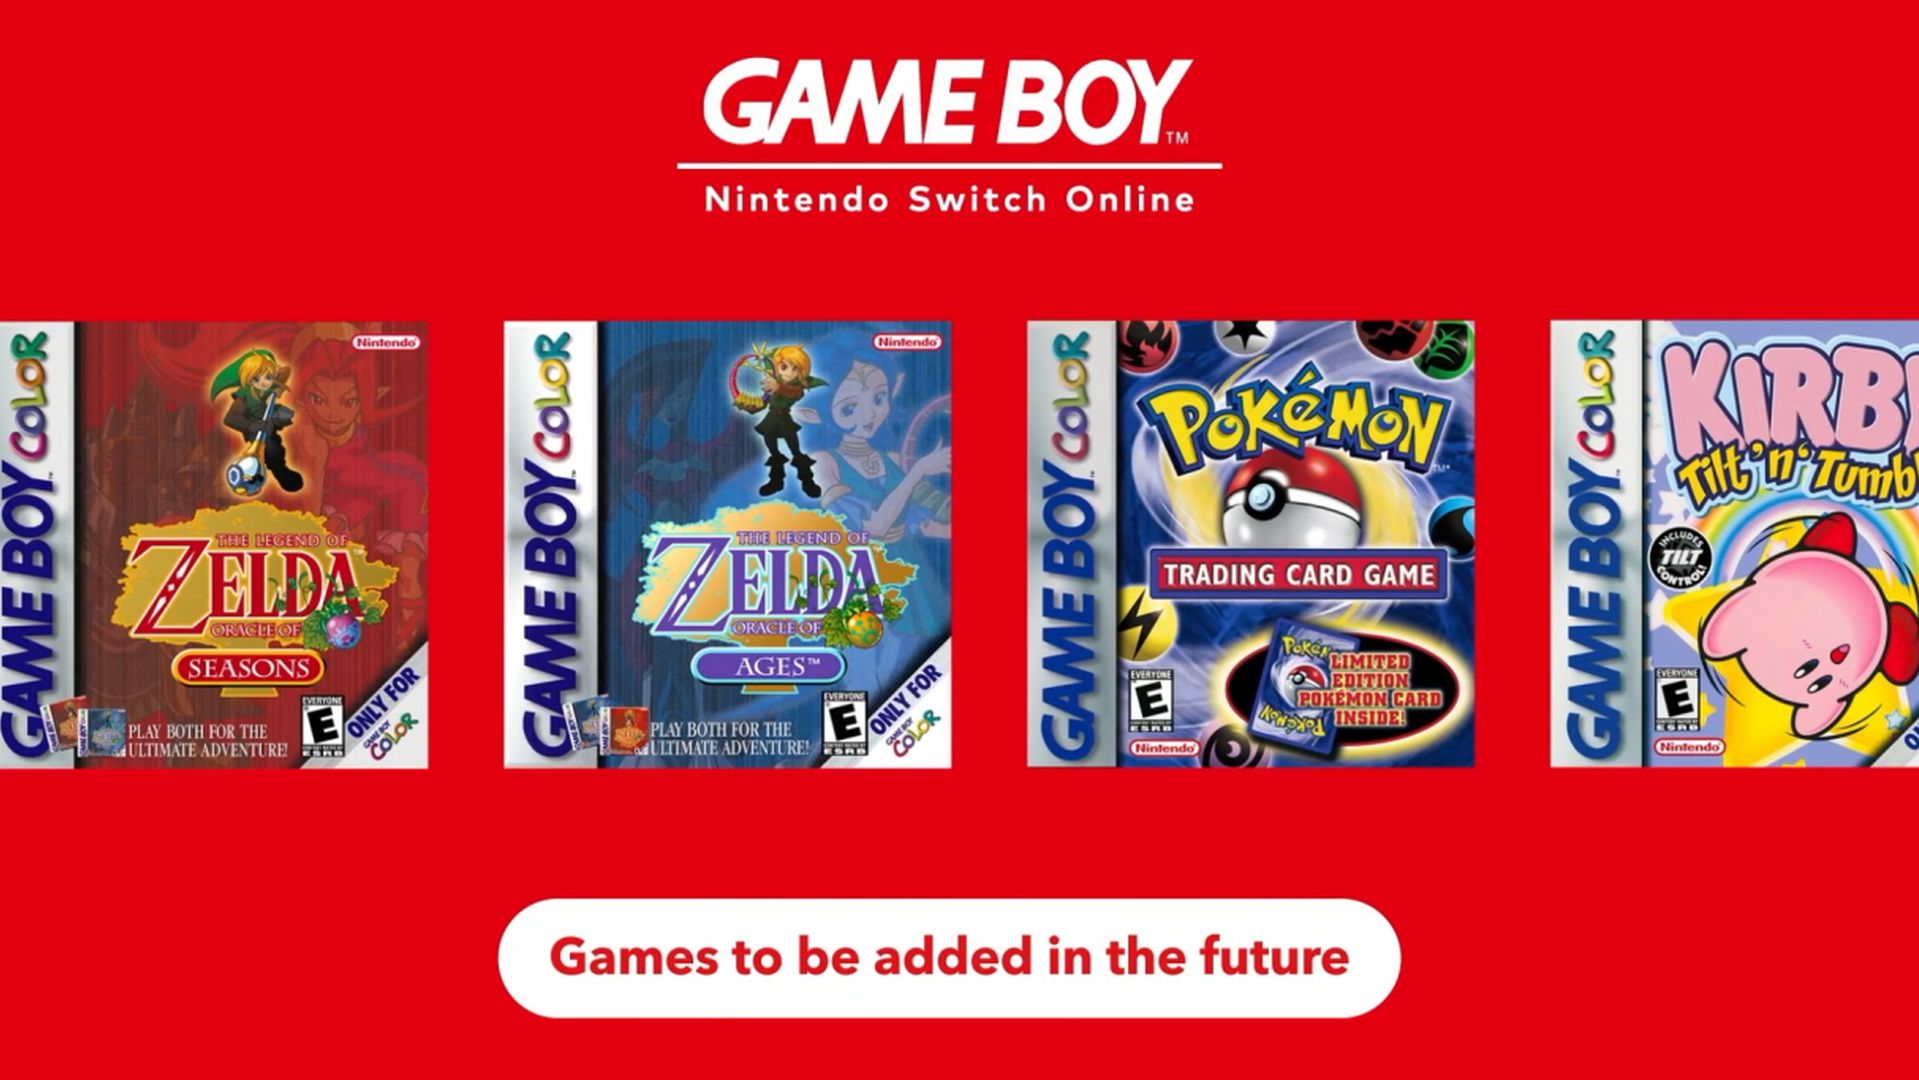 Future Game Boy and Game Boy Advance Titles for Nintendo
Switch Online Revealed